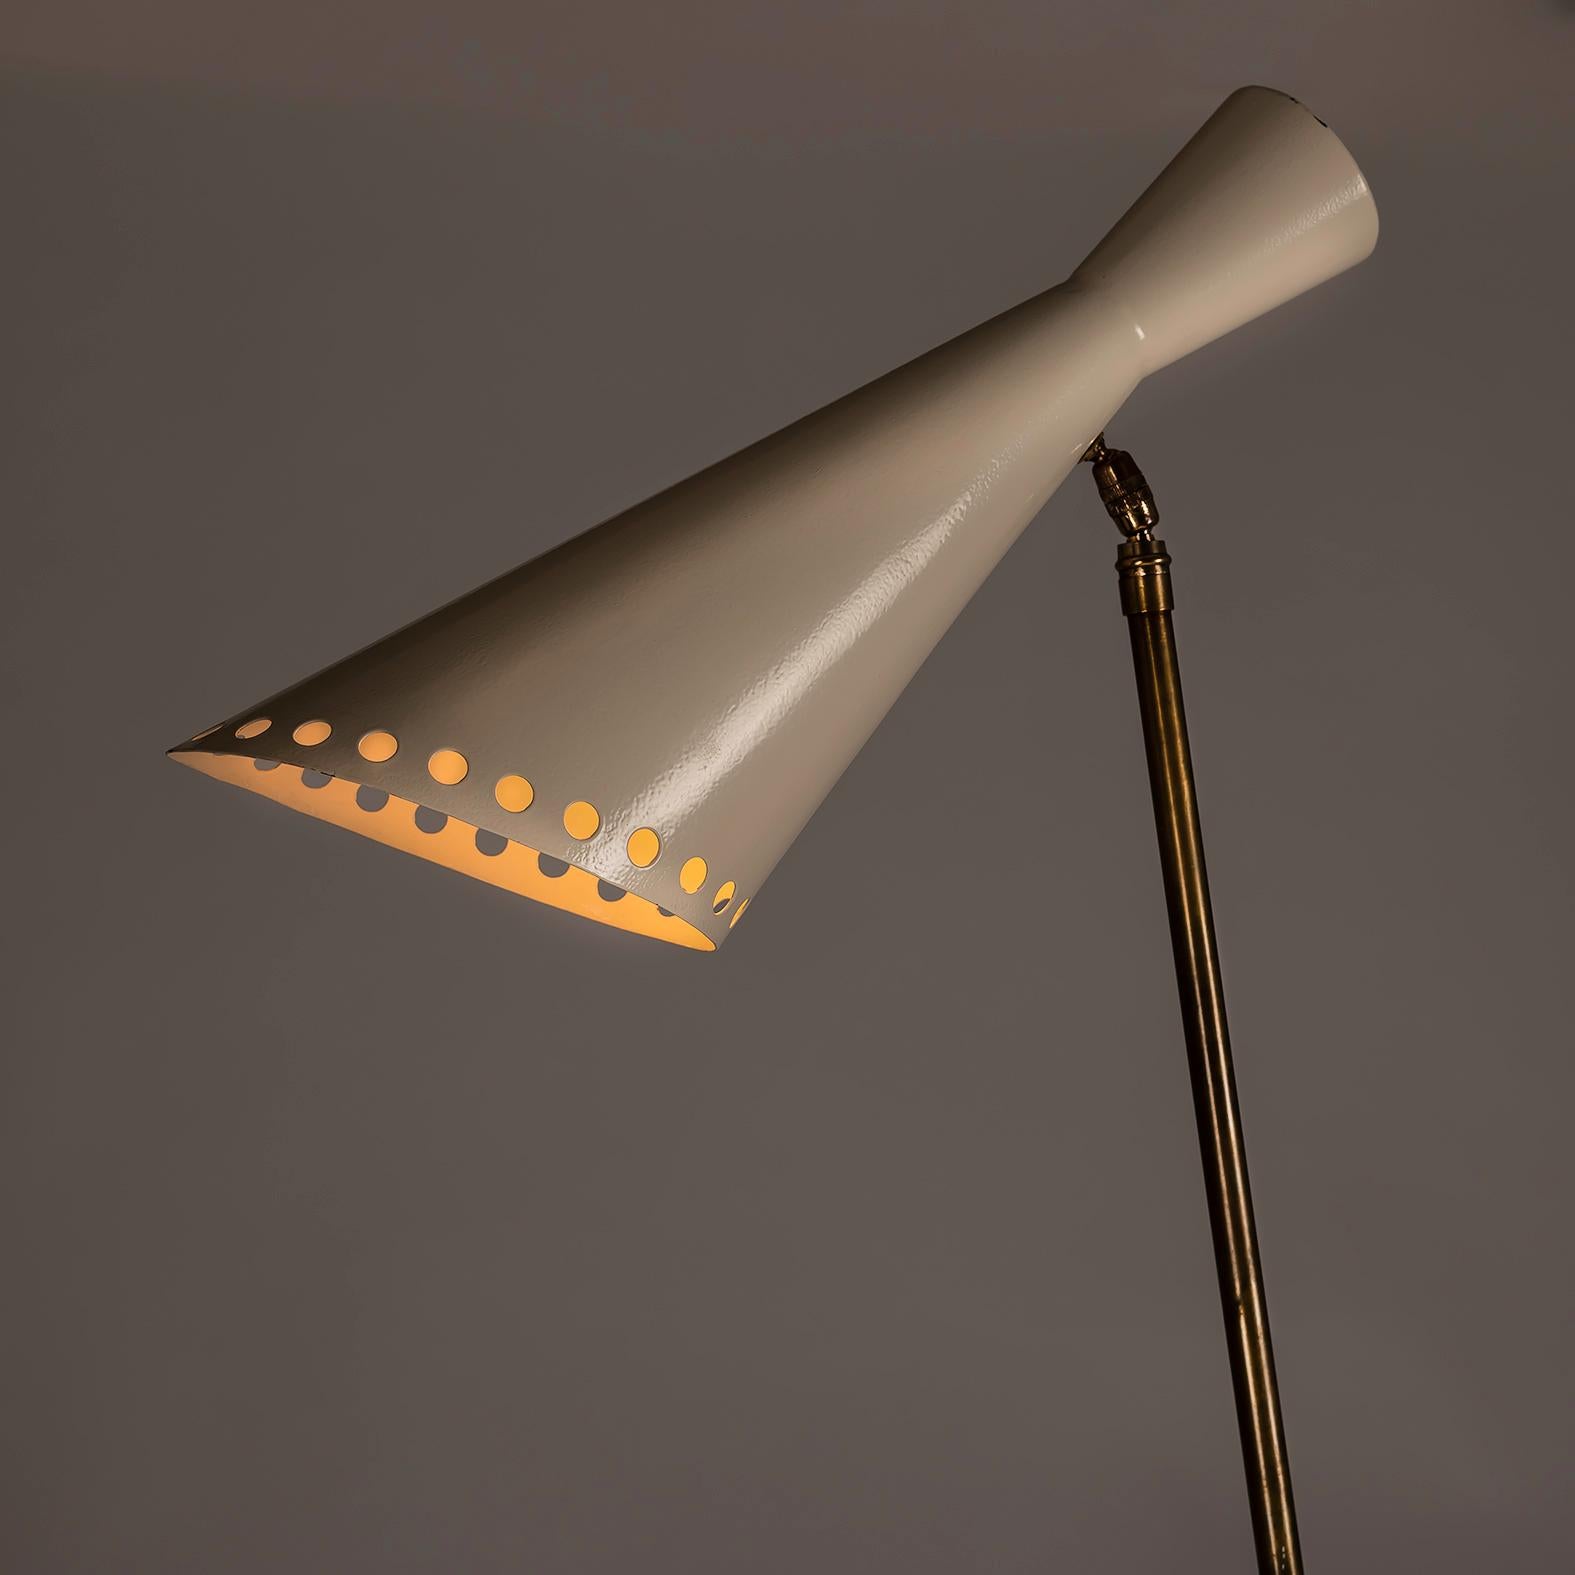 The Italian Diabolo Floor Lamp in Brass and Metal Lacquered from the 1950s stands as a remarkable testament to the creativity and craftsmanship of mid-century Italian design. What sets this lamp apart is its distinctive diabolo shape, a sleek and